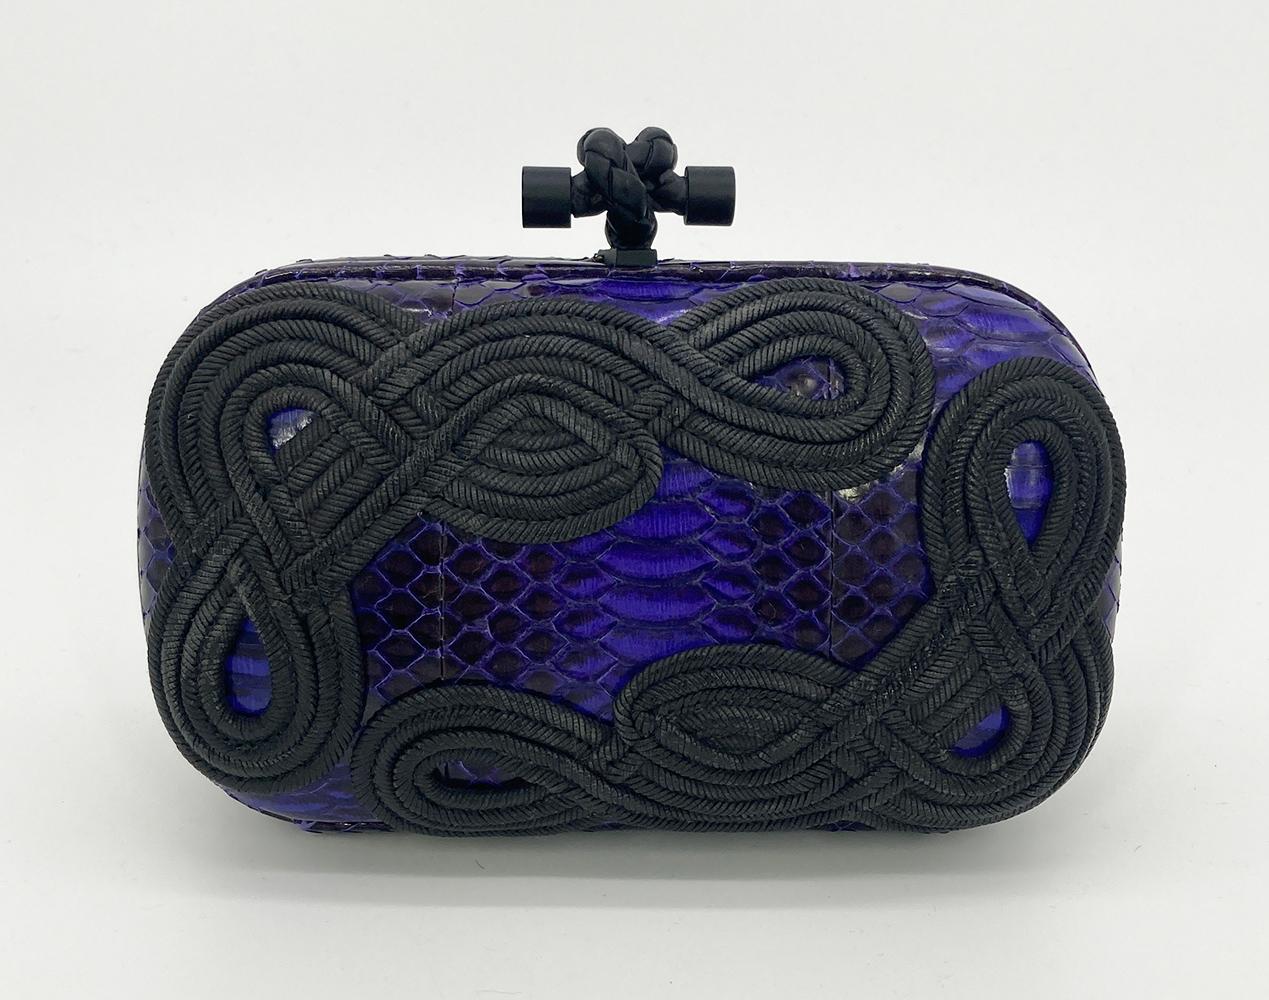 Bottega Veneta Purple Snakeskin Knot Clutch in excellent condition. Purple snakeskin exterior trimmed with distressed black rope embroidery along front and back side. Matte black top knot lift latch closure opens to a brown suede interior. Overall